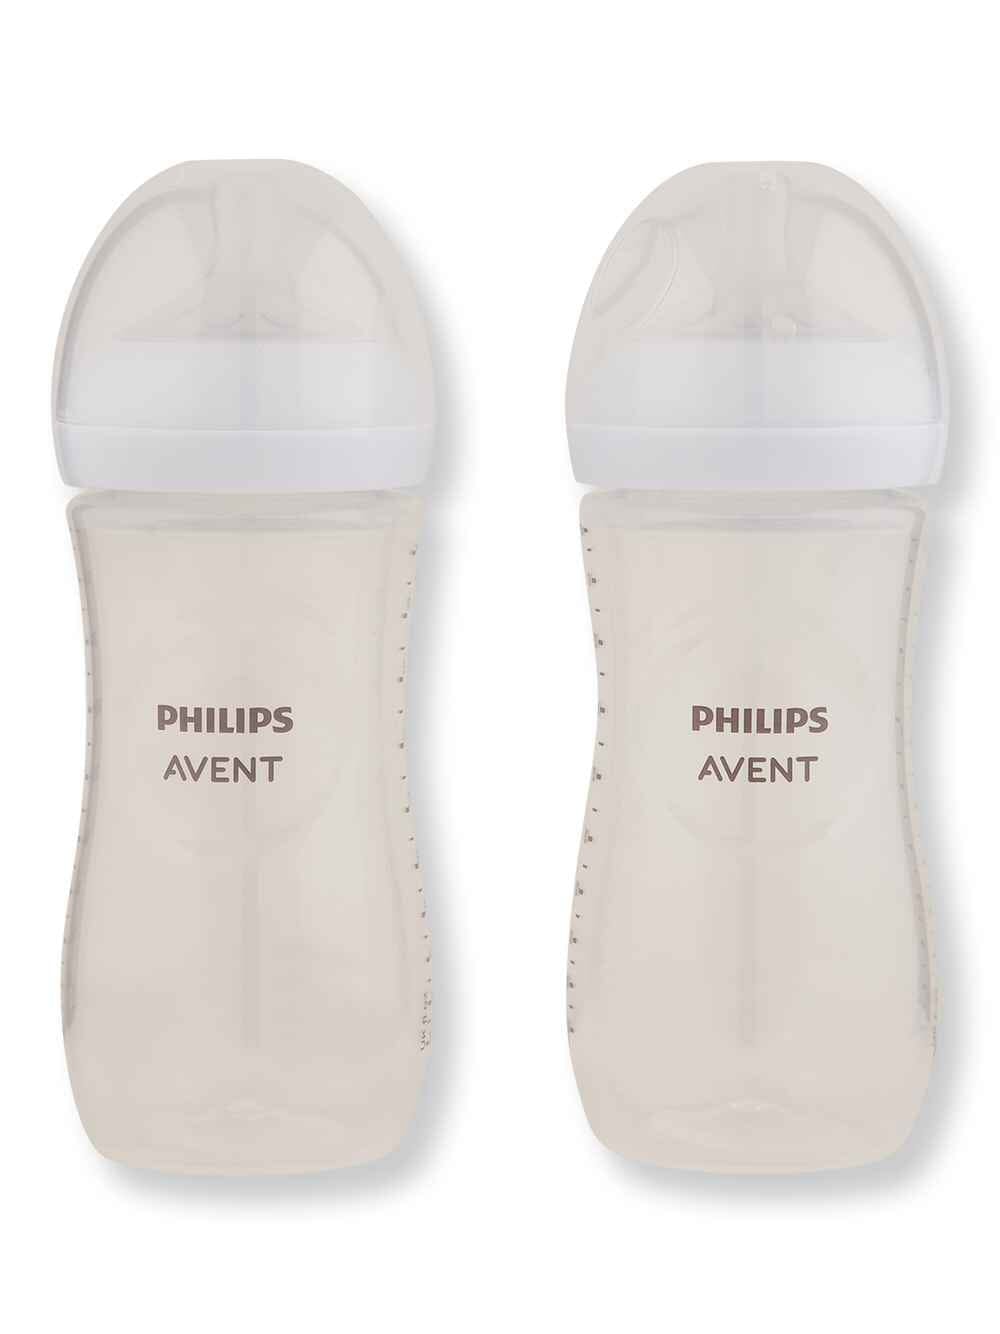 Philips Avent Philips Avent Natural Baby Bottle With Natural Response Nipple Clear 11 oz 2 Ct Baby Bottles 